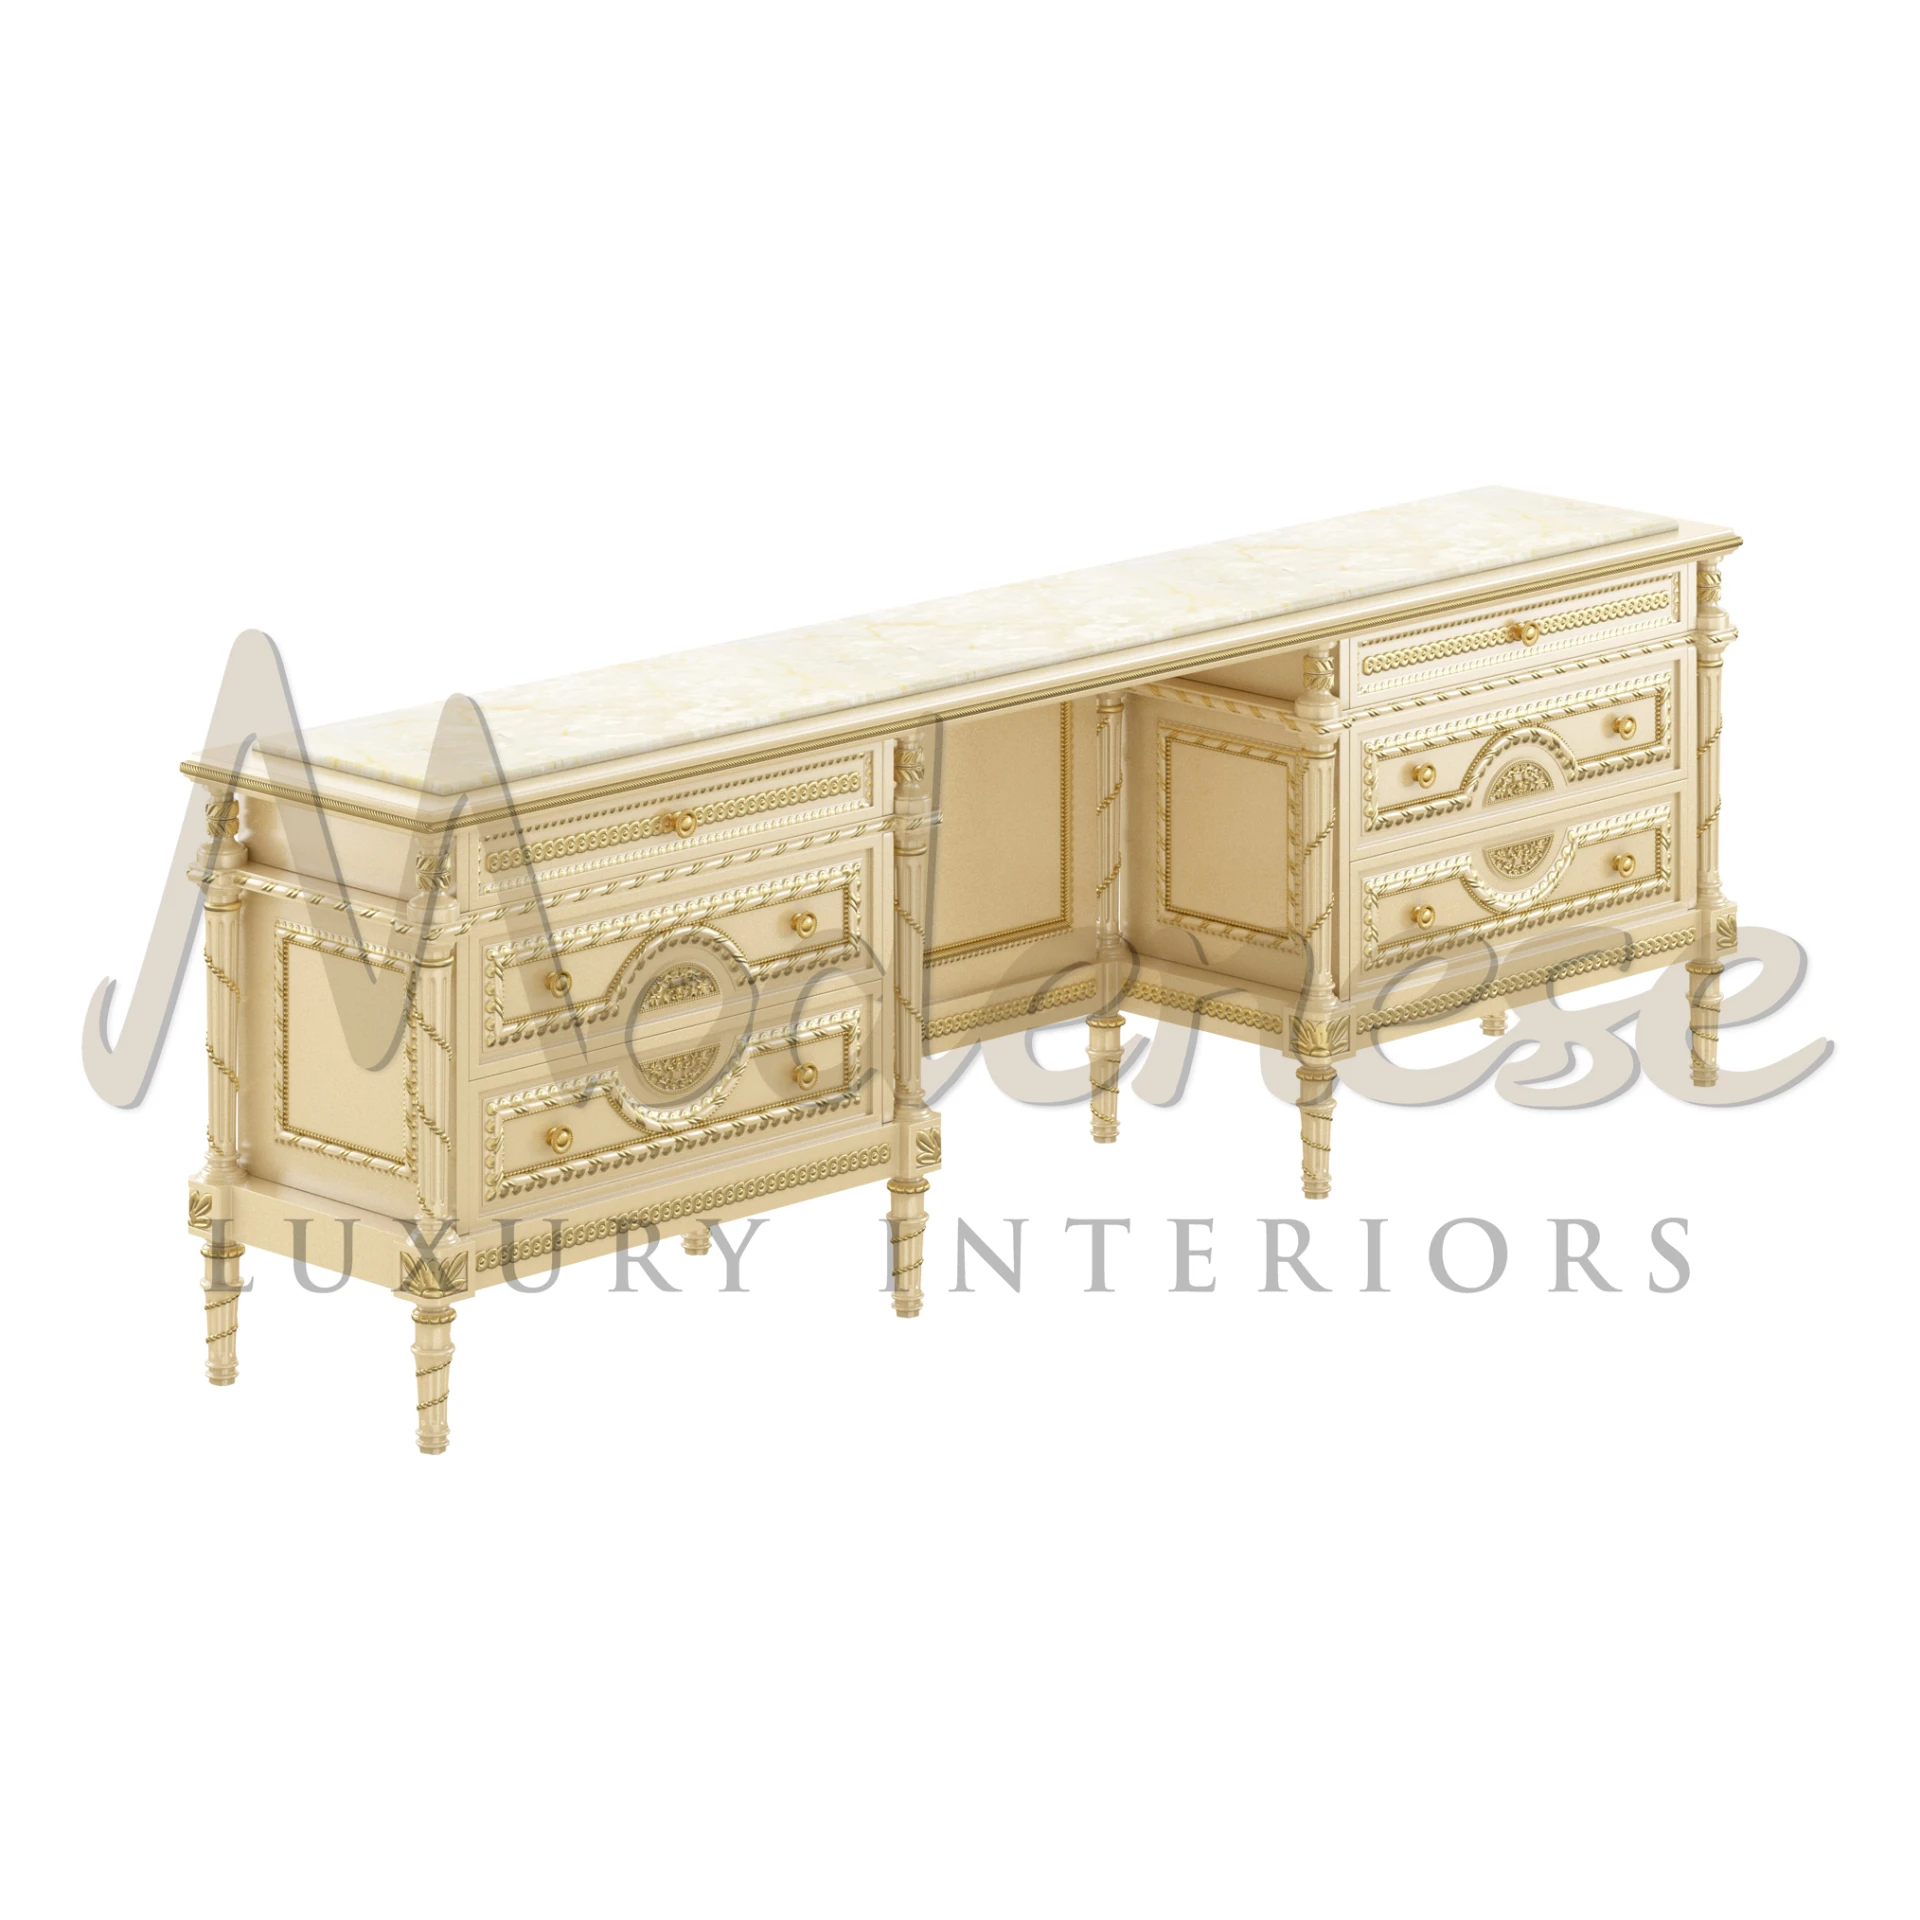 Elegant long dressing table with a luxurious onyx marble top, featuring a symmetrical six-drawer design in a creamy ivory finish. Each drawer is adorned with golden knobs and decorative inlays.